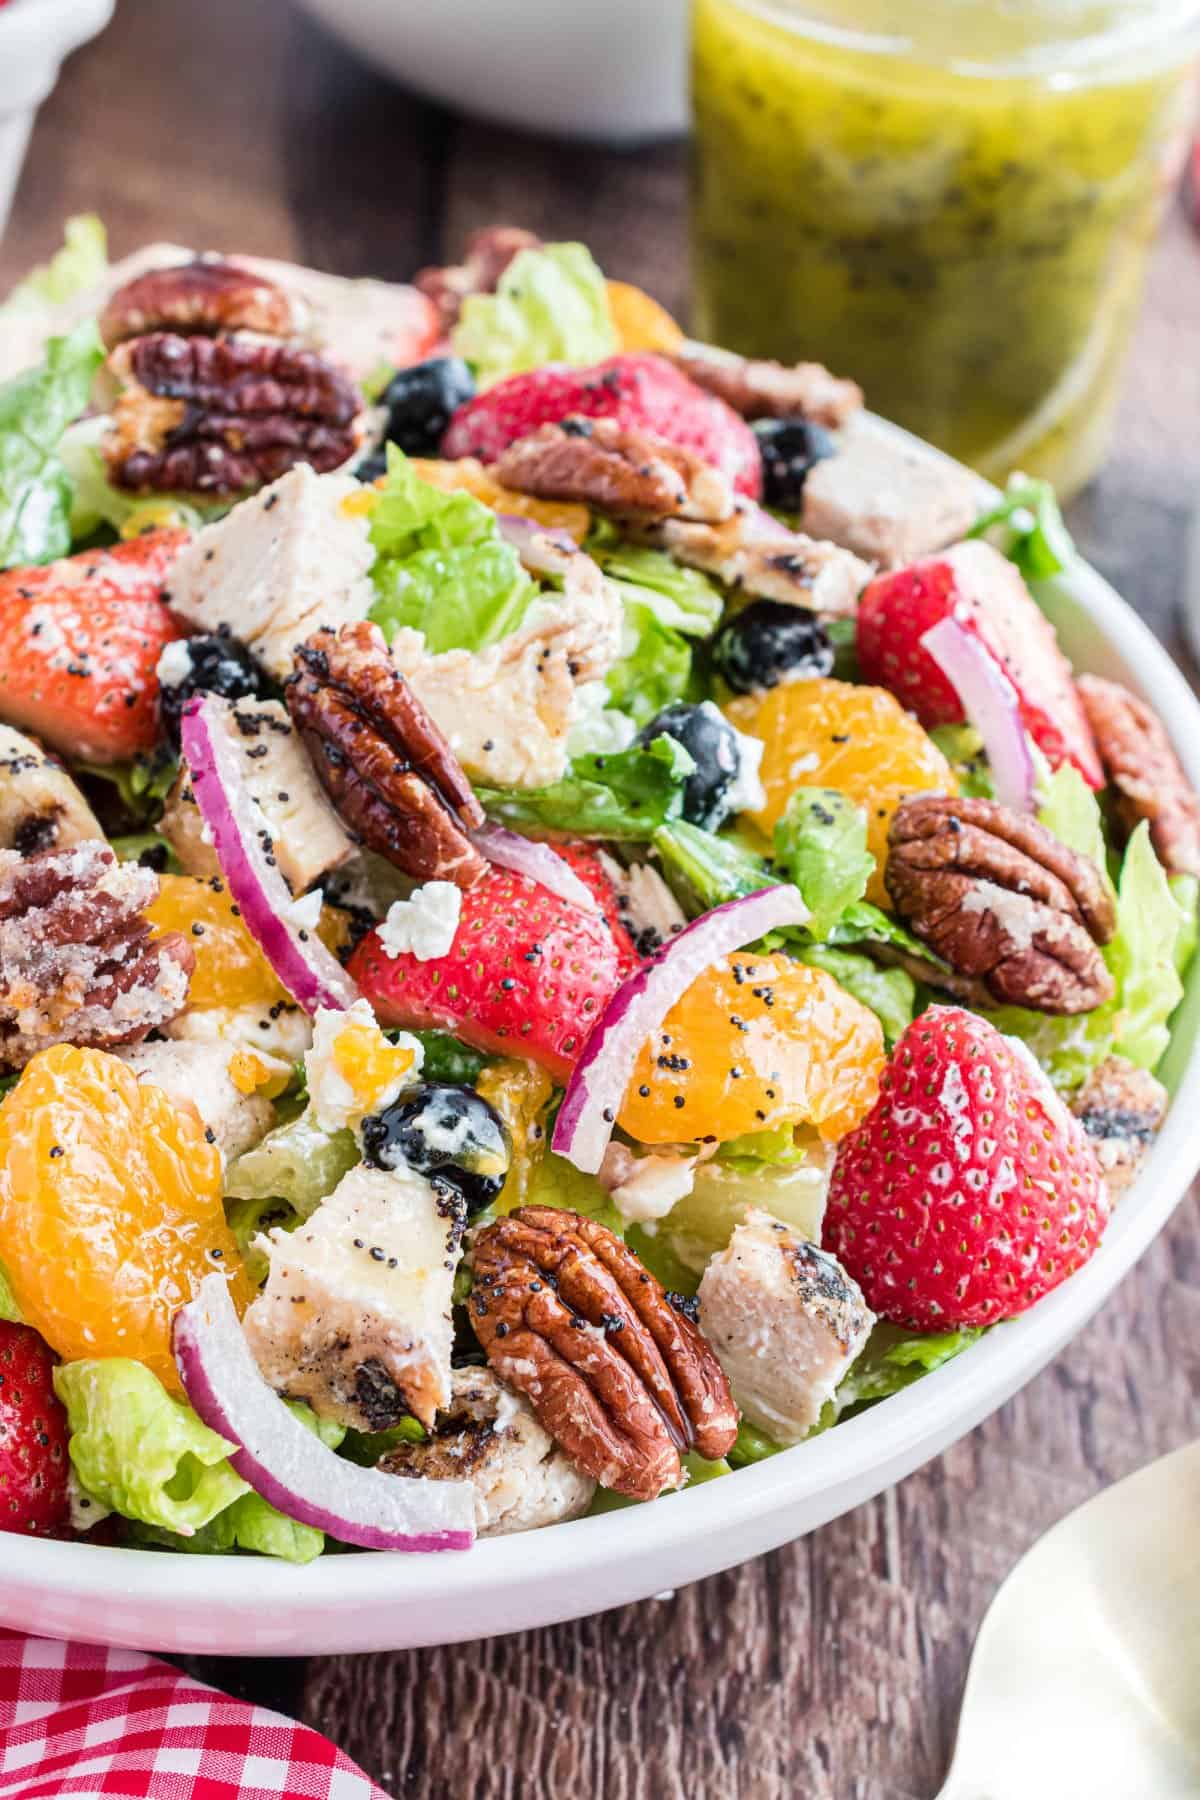 Strawberry salad just like Panera with pecans, oranges, and more.